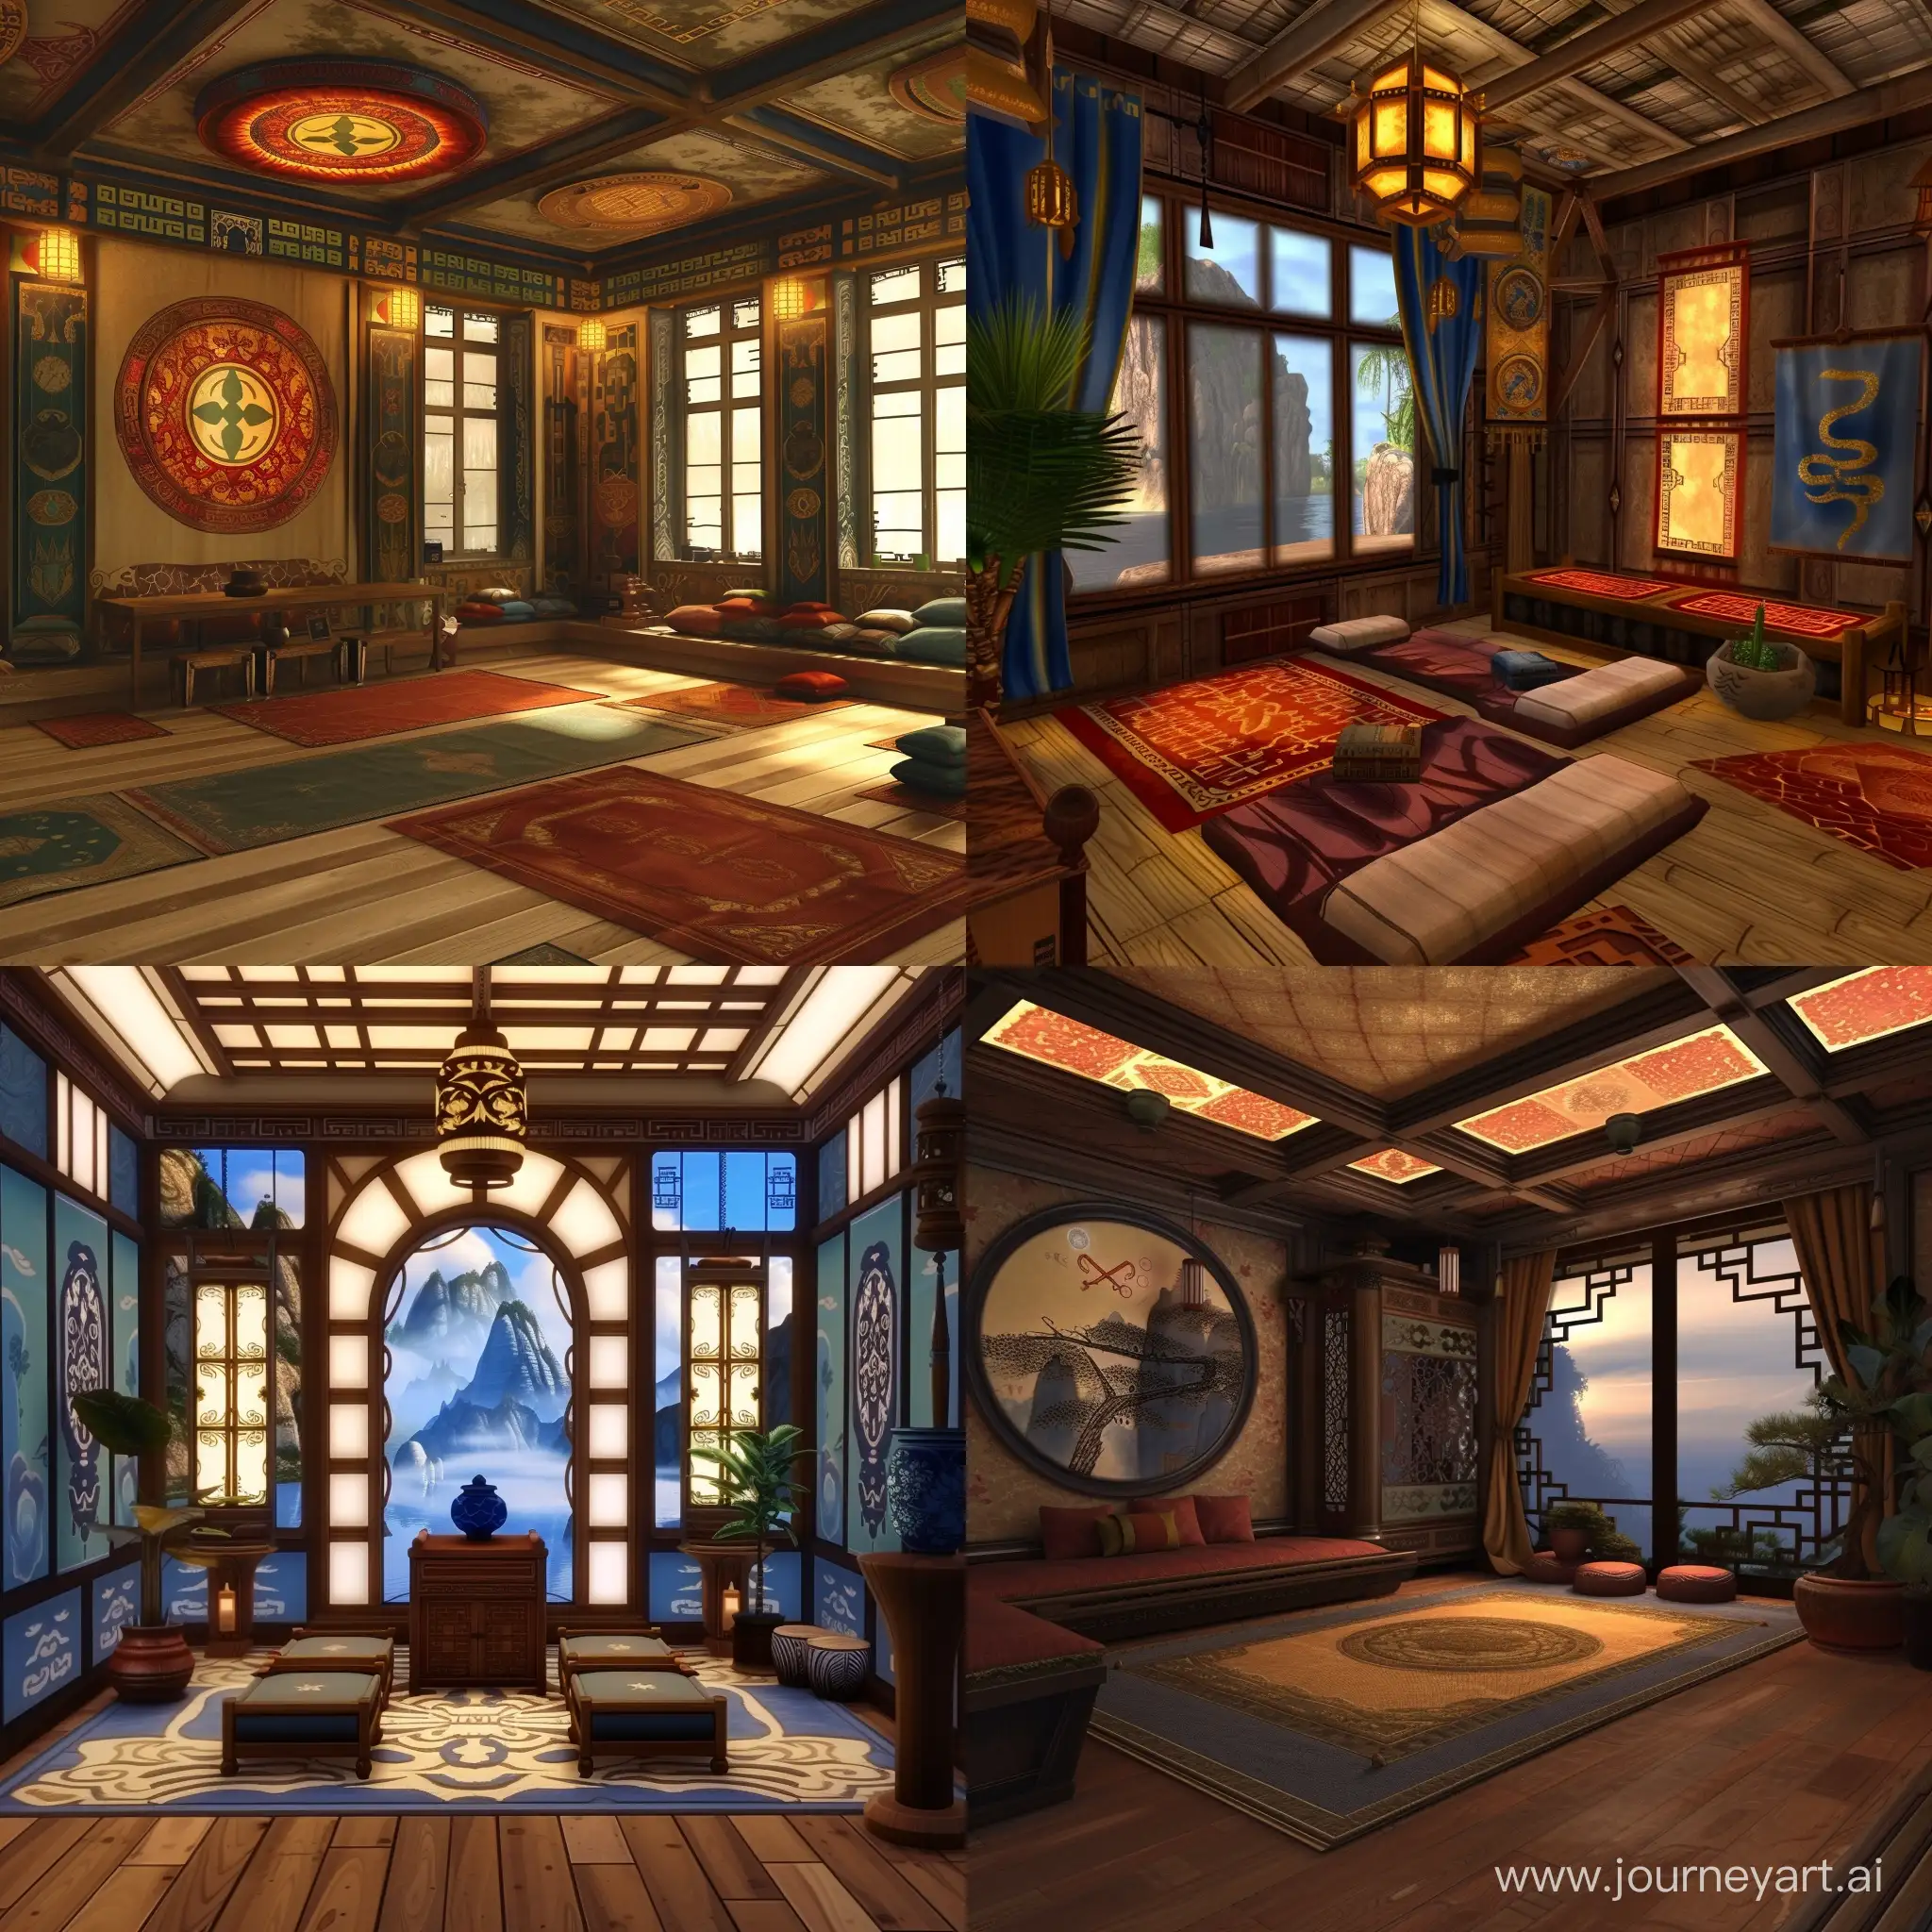 Avatar-The-Last-Airbender-Themed-Room-with-Unique-Decor